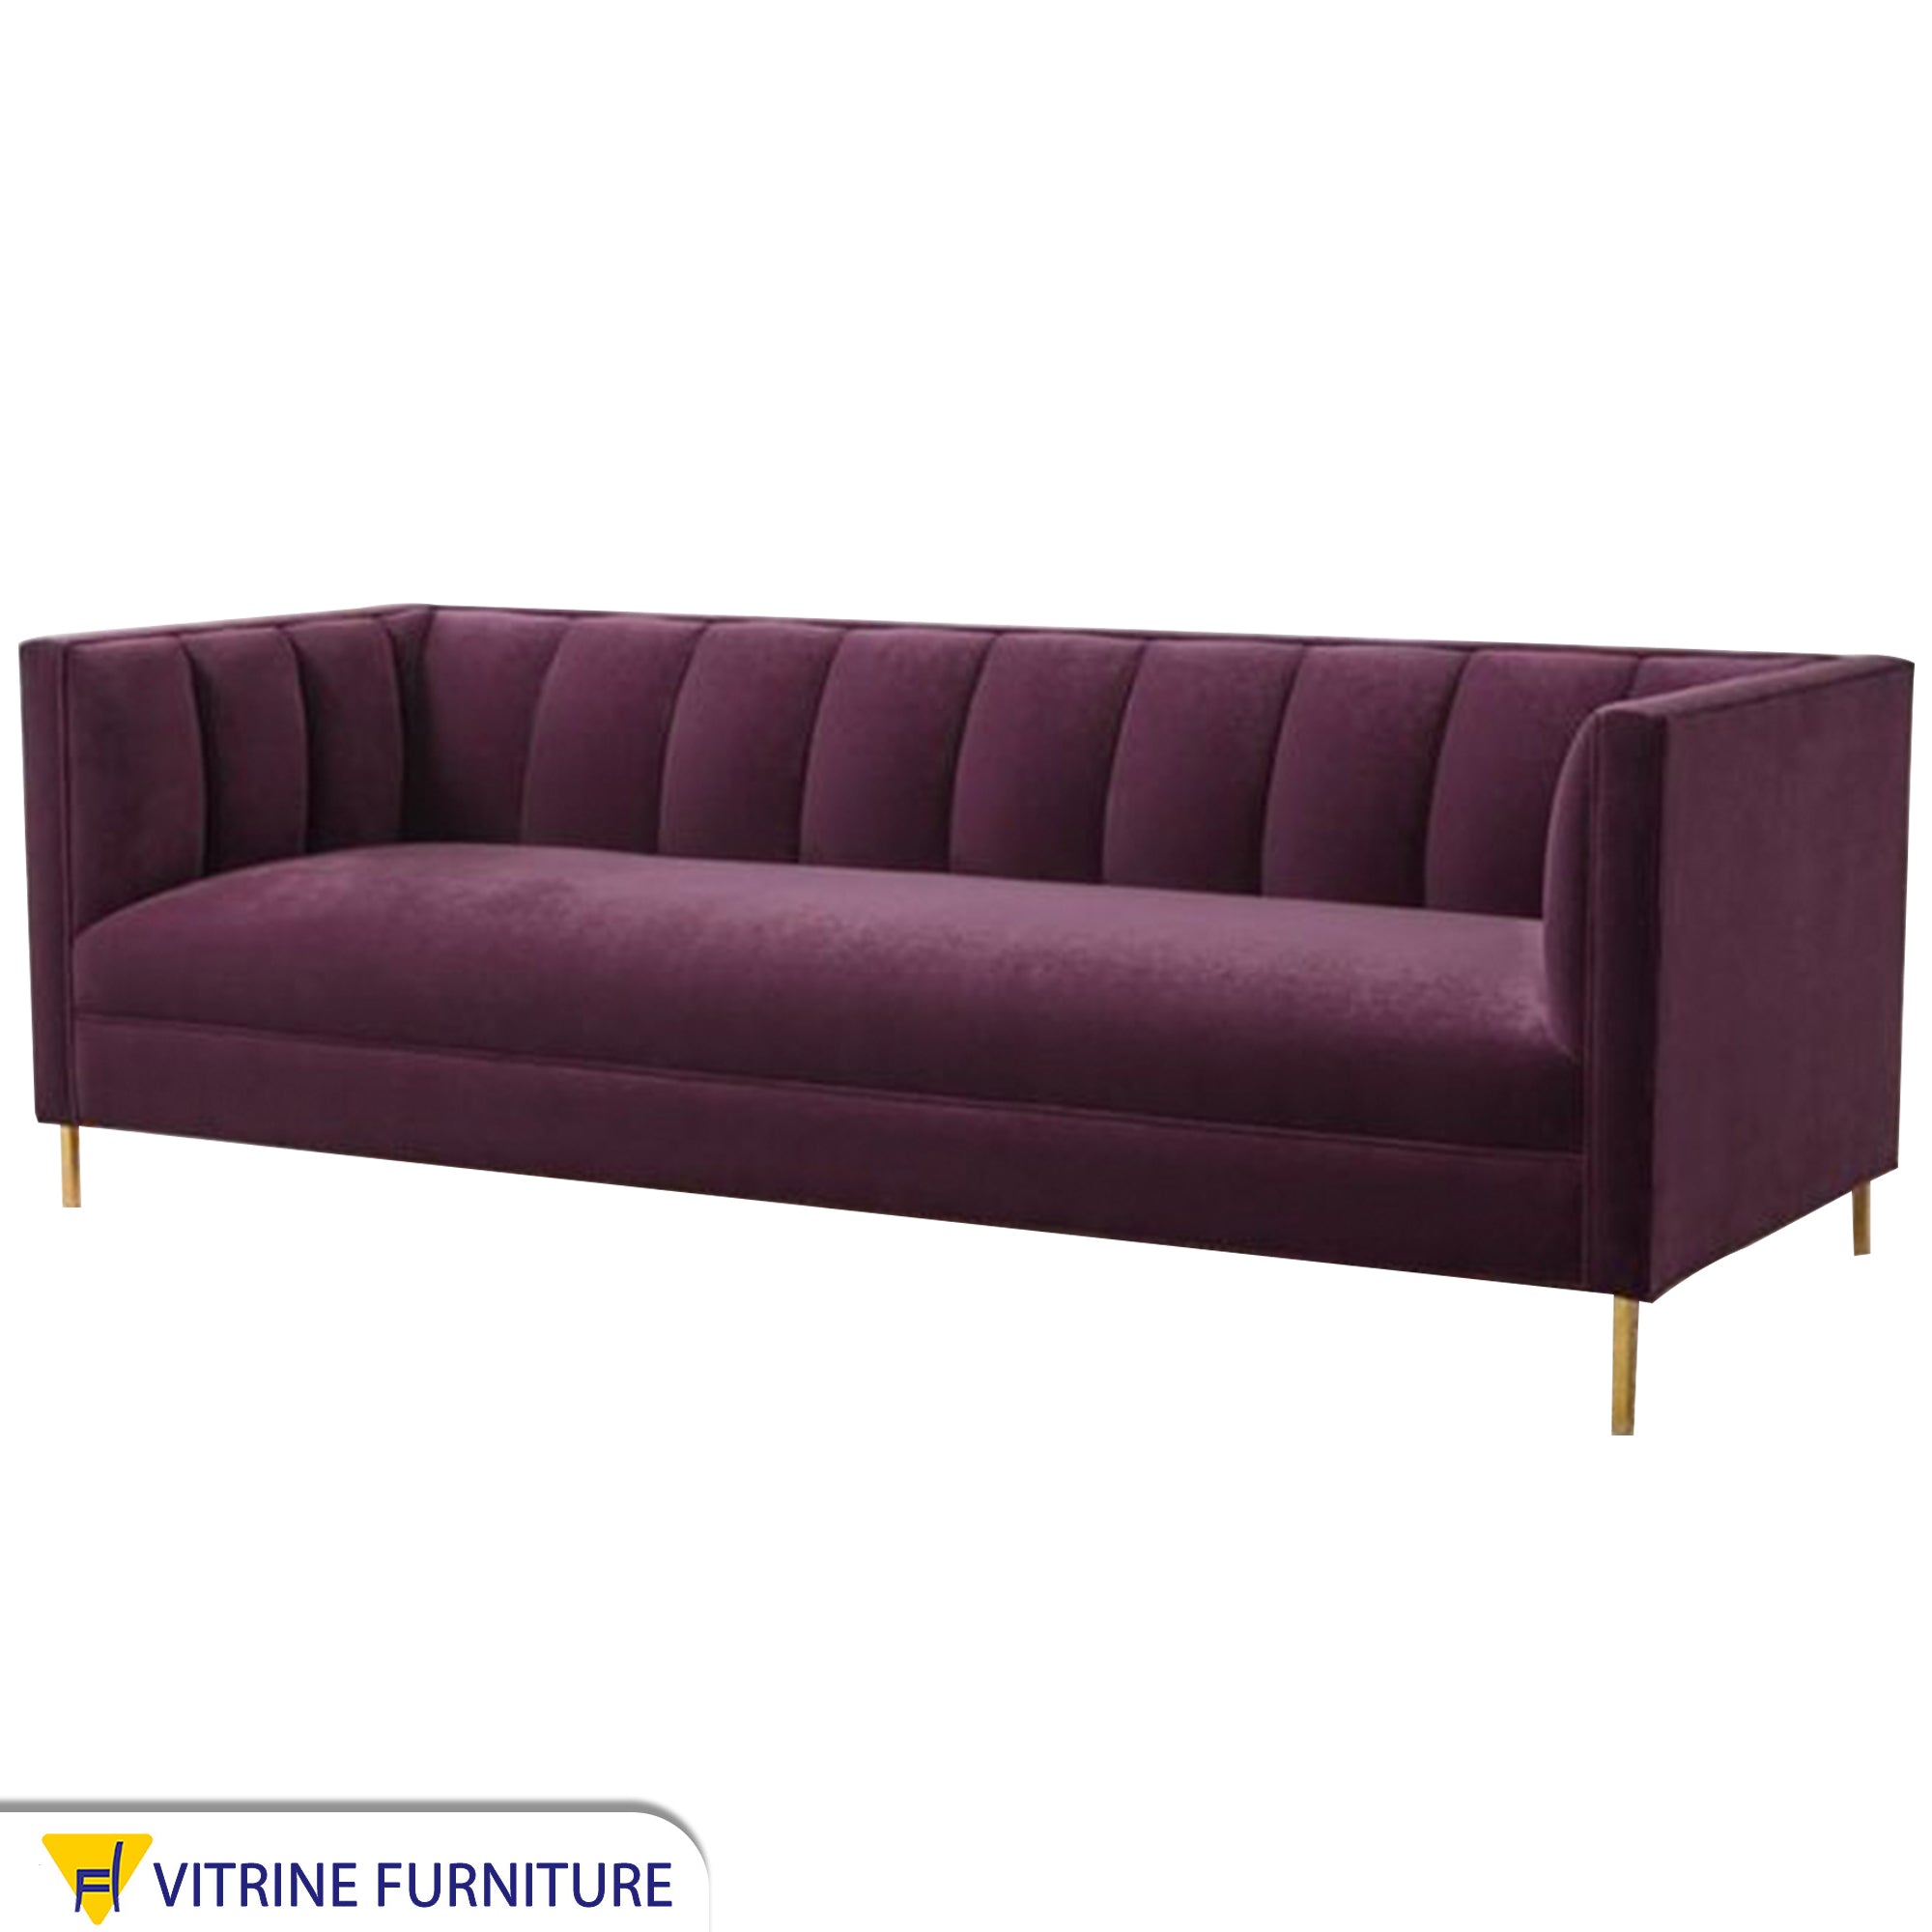 A burgundy sofa with successive recessed lines on the backrest